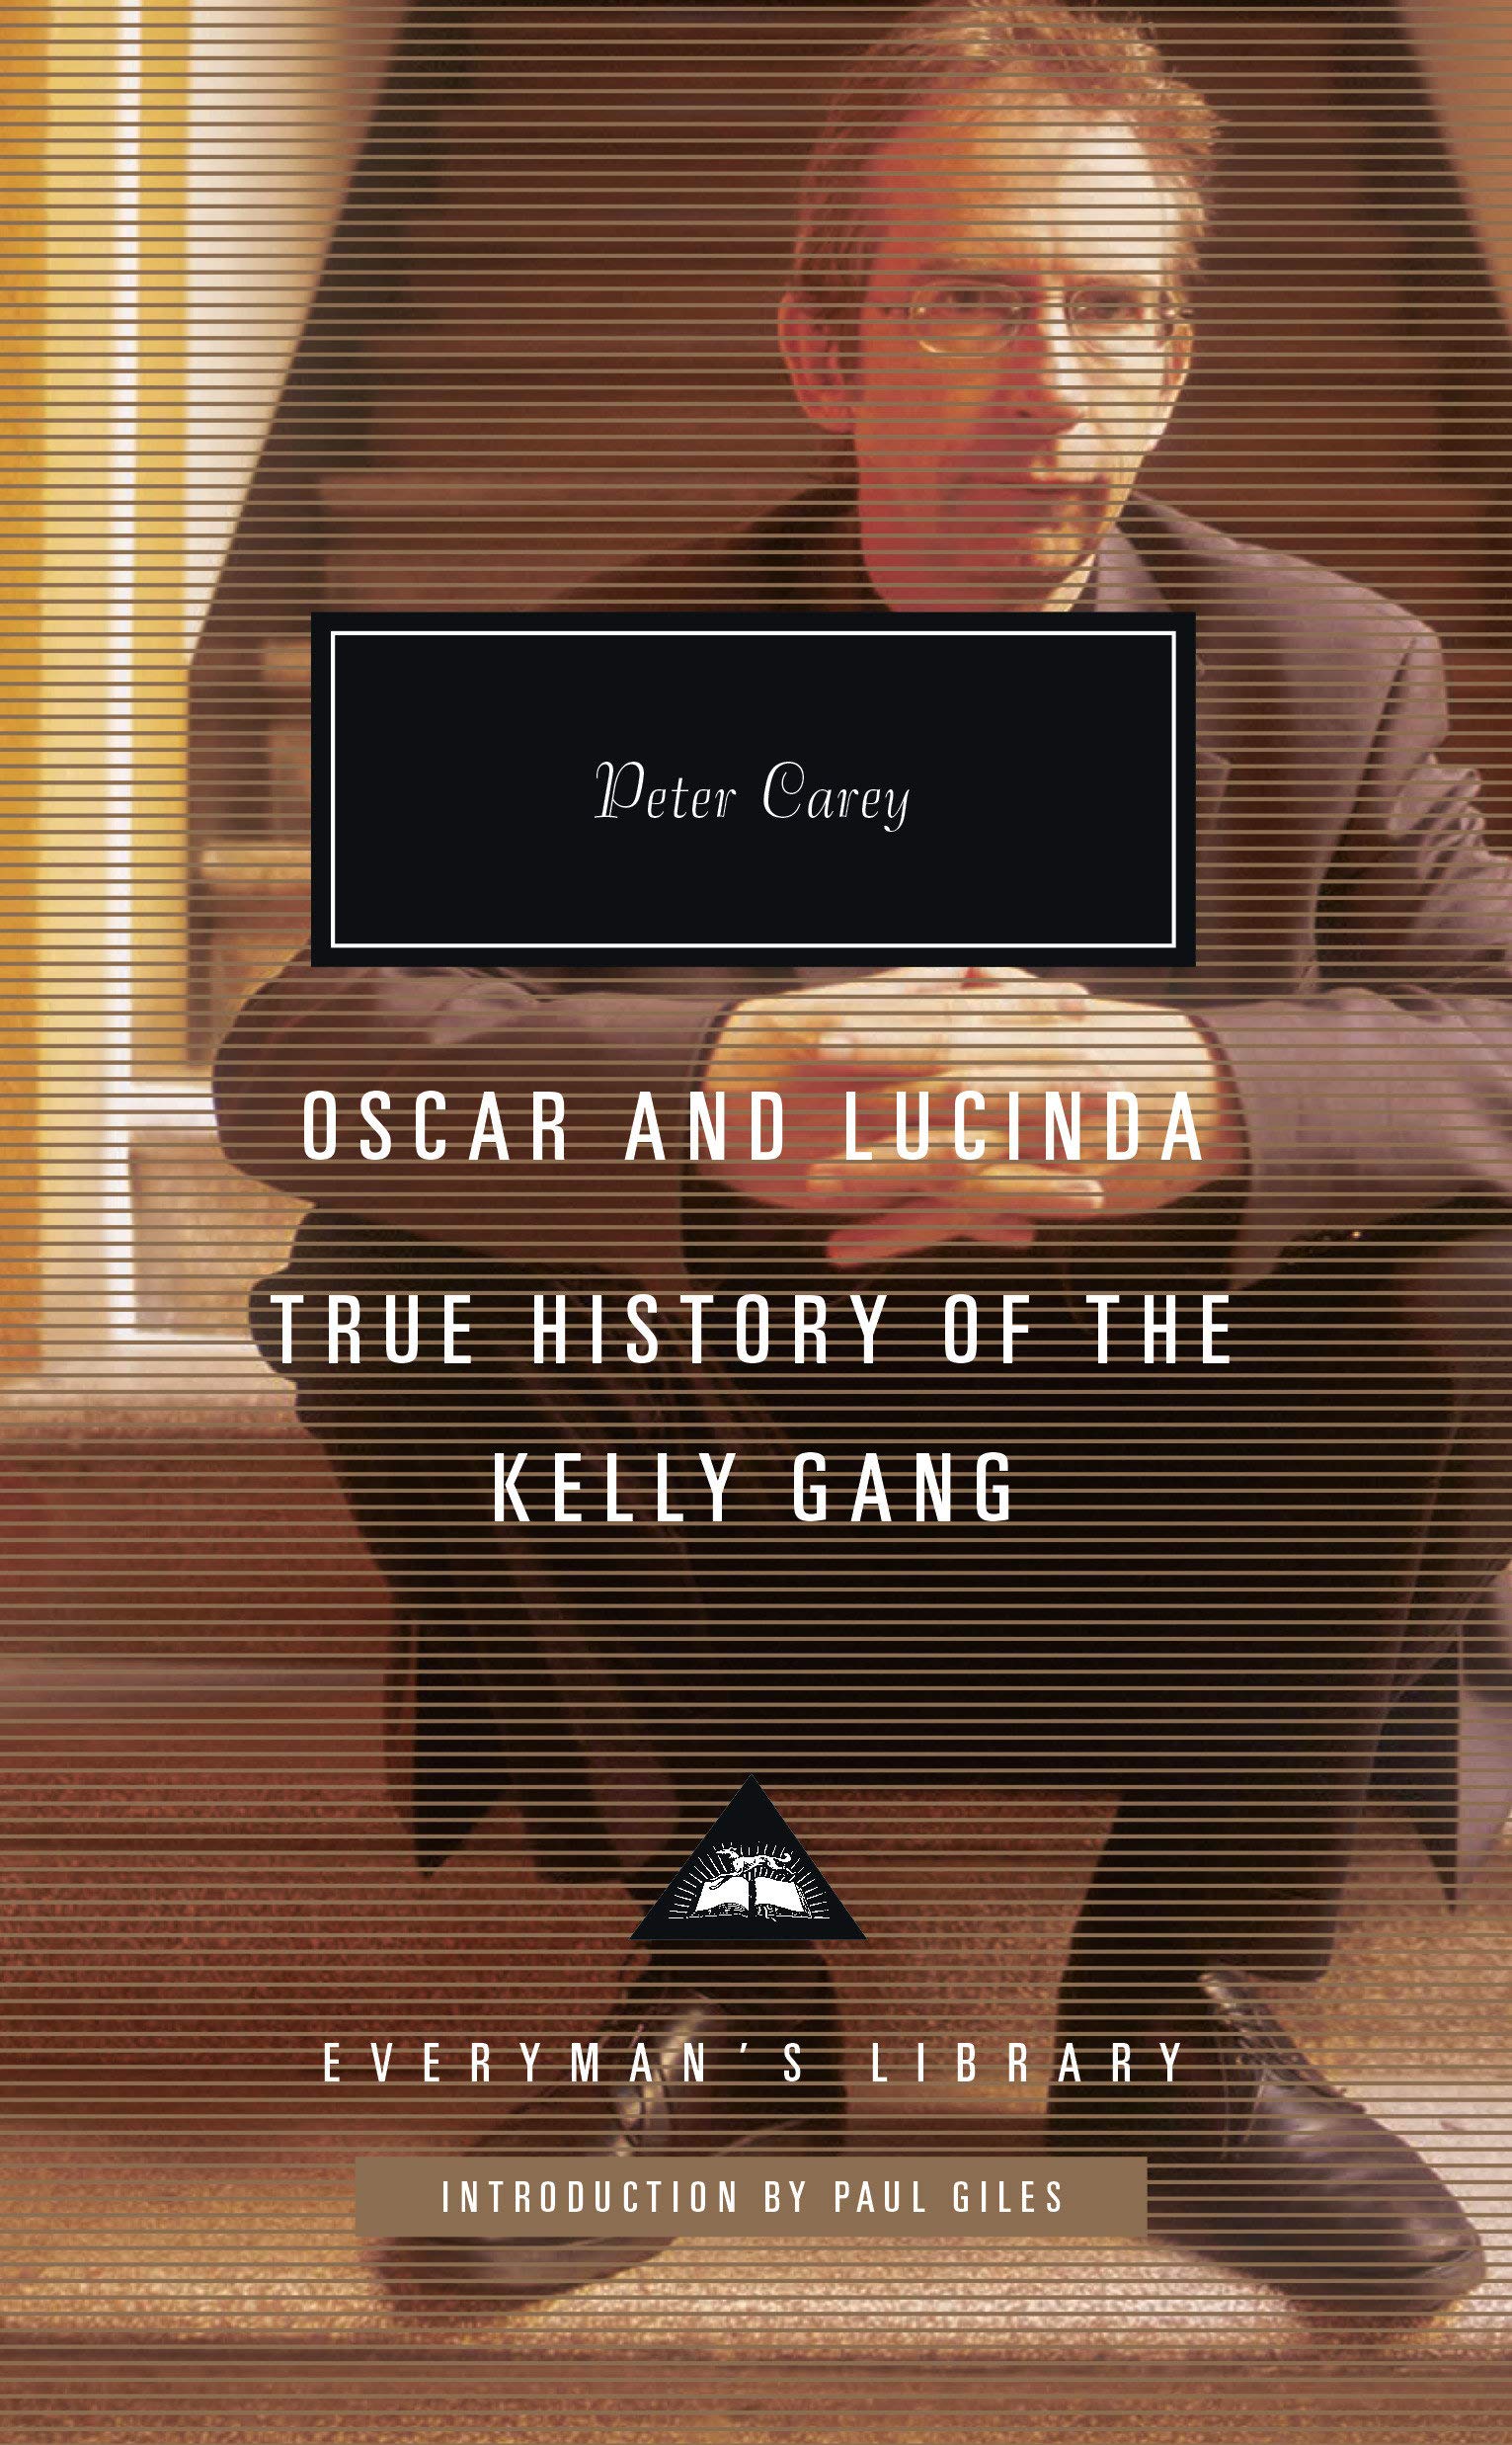 Oscar and Lucinda, True History of the Kelly Gang (Everyman's Library Contemporary Classics Series)